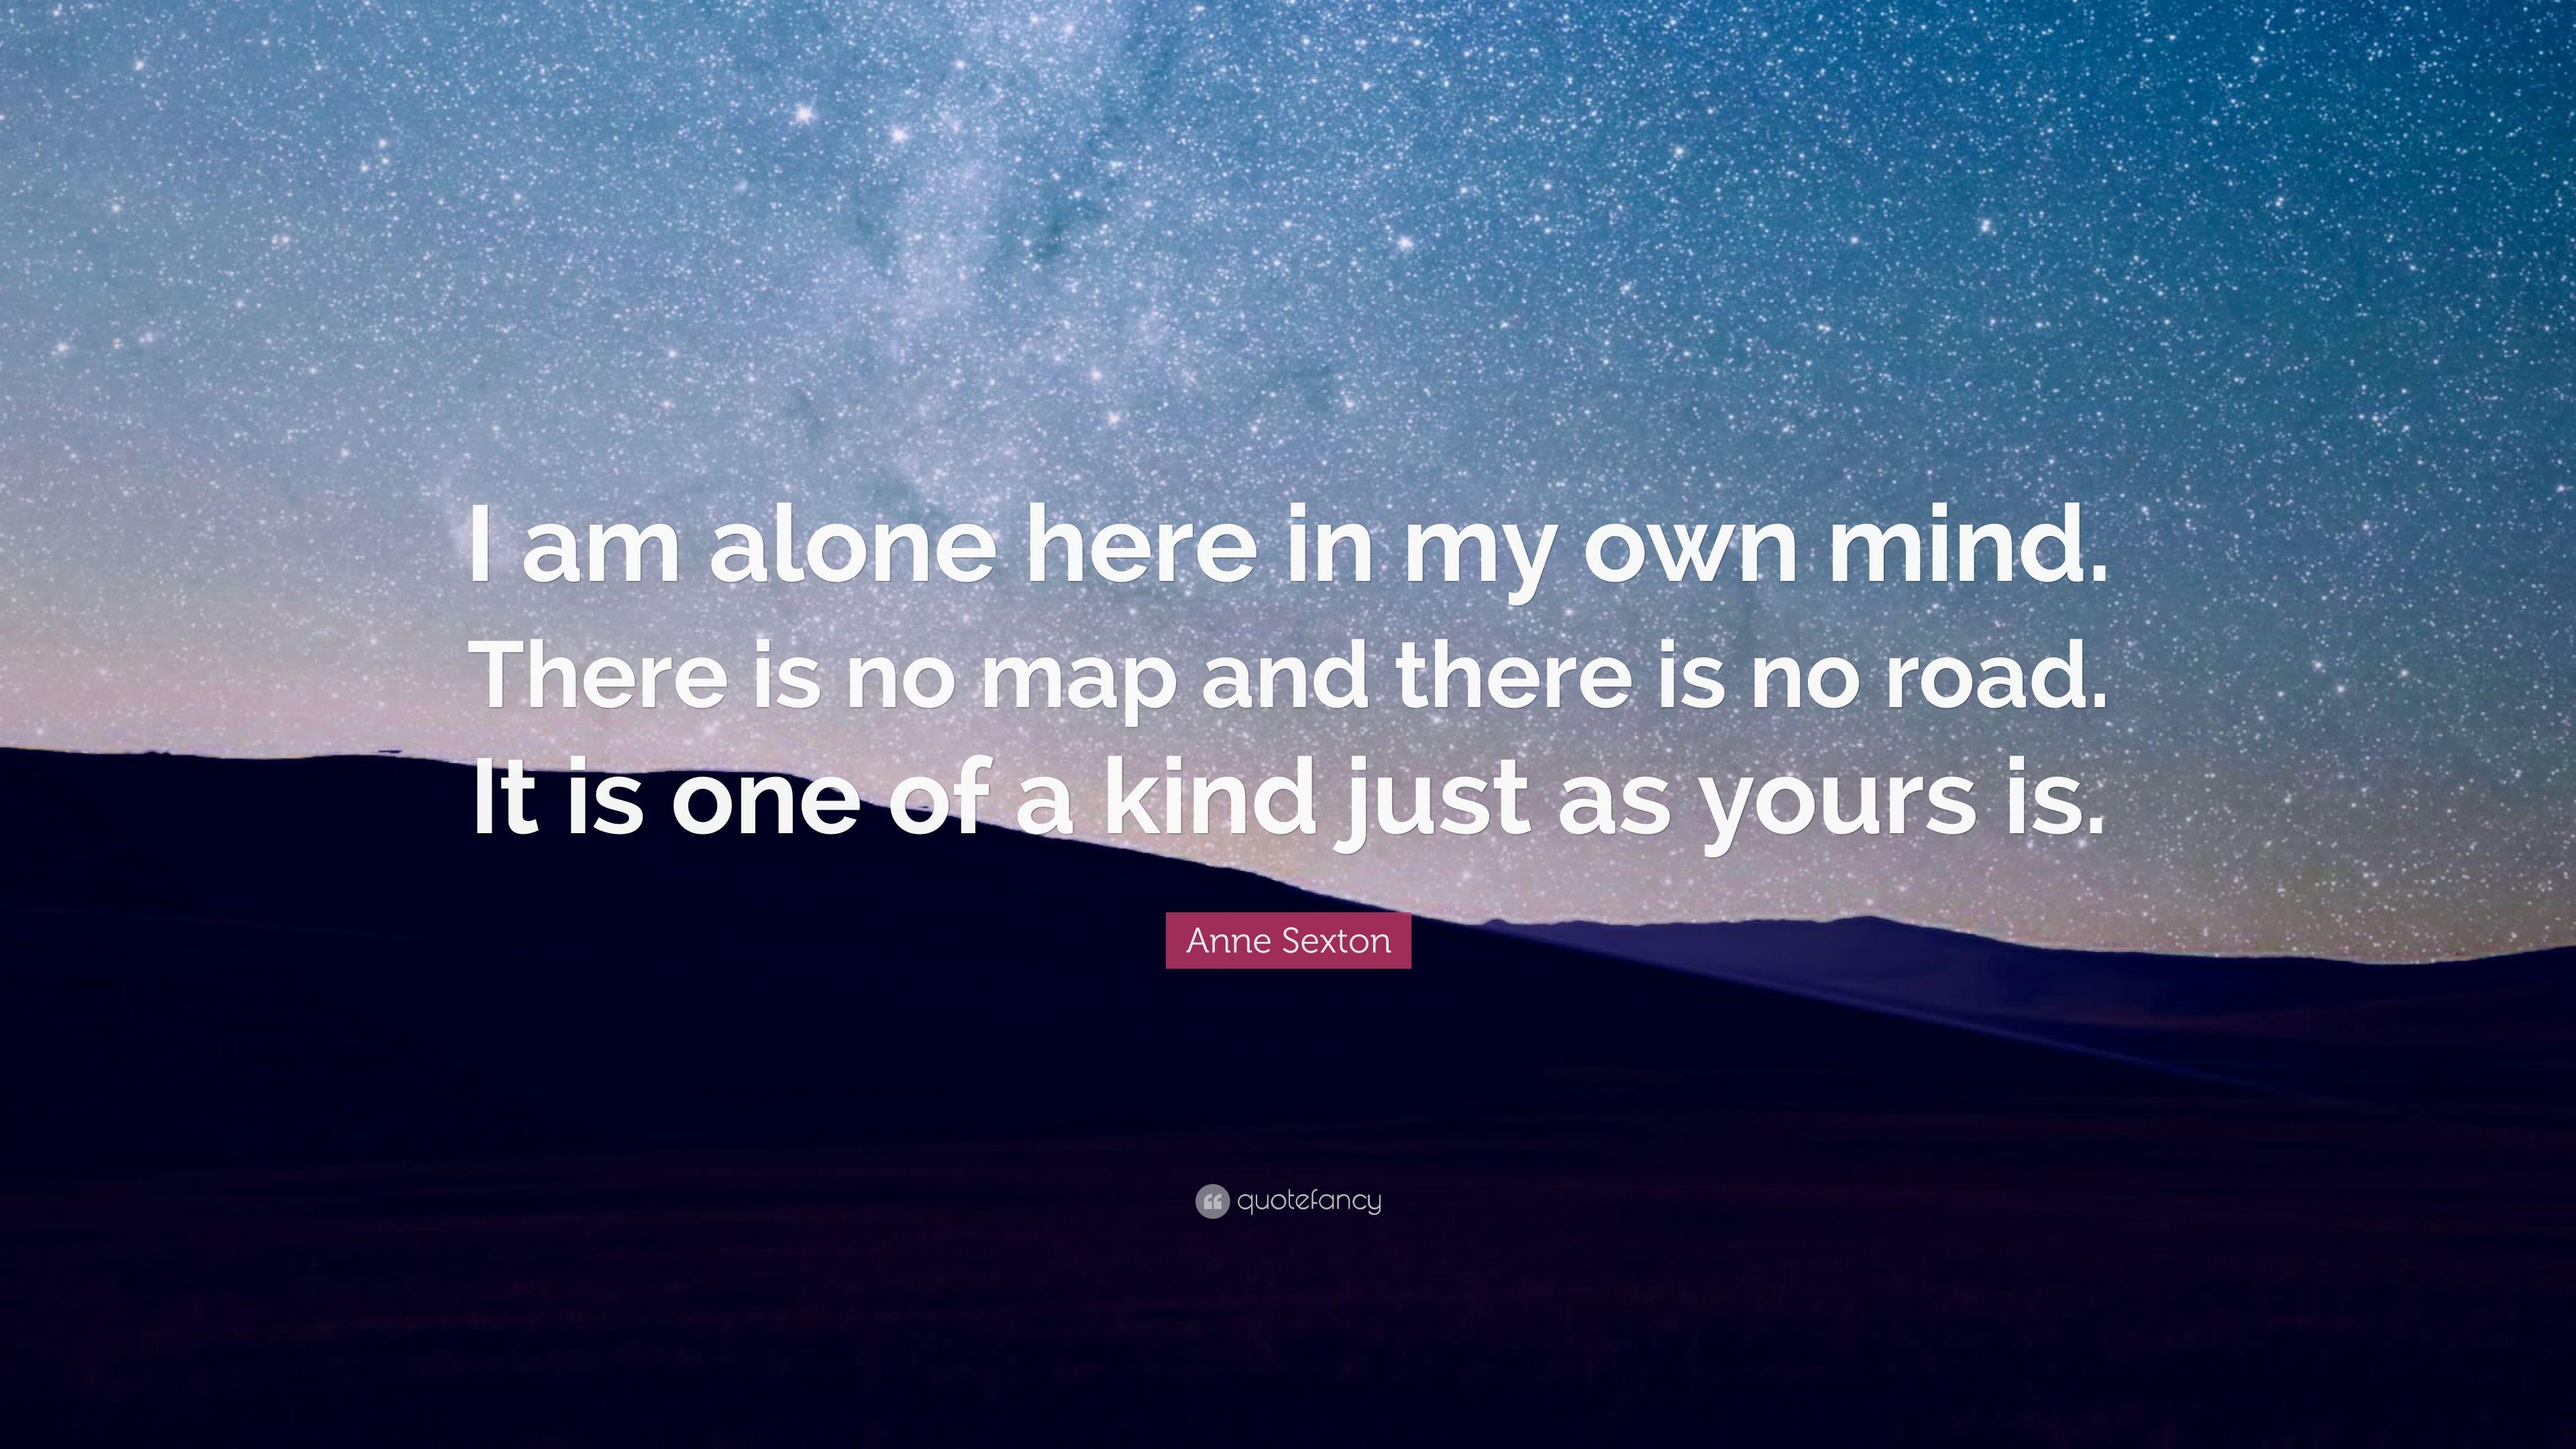 Anne Sexton Quote: “I am alone here in my own mind. There is no map